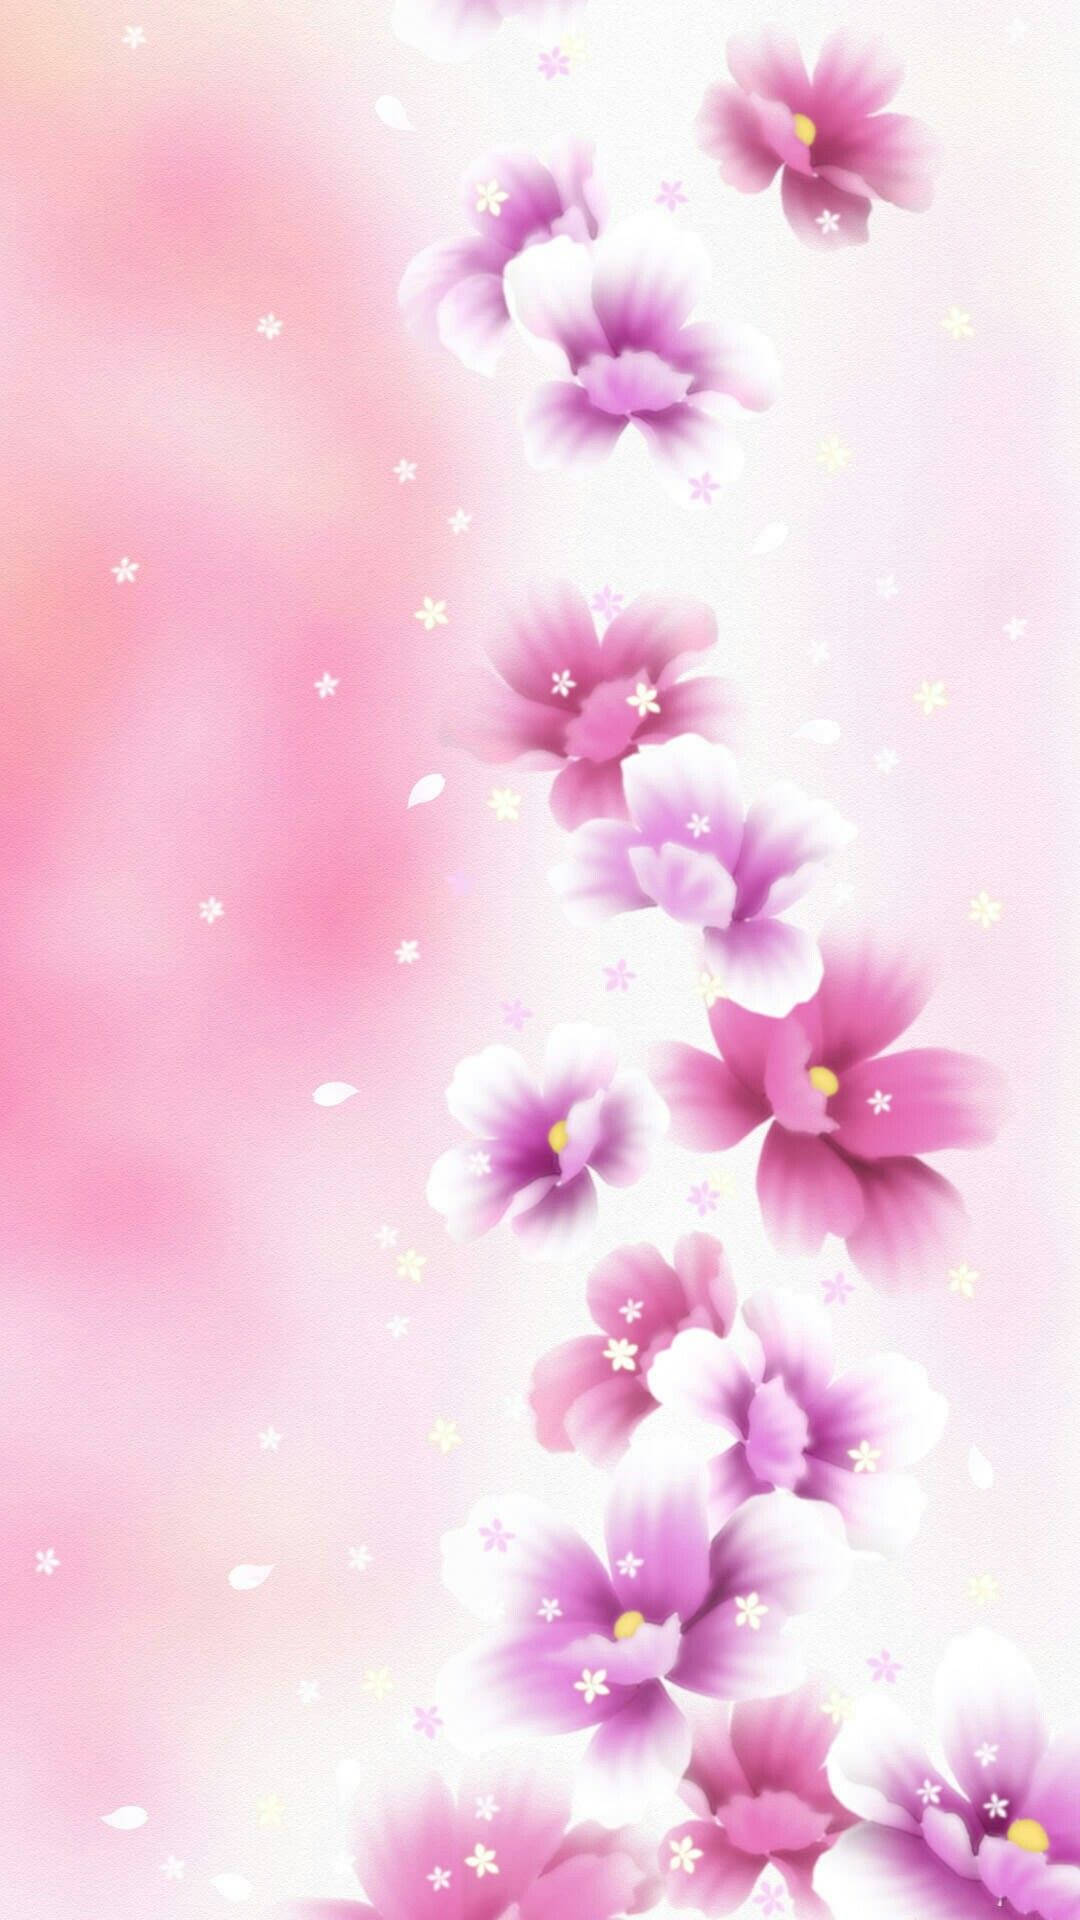 100+] Cute Mobile Wallpapers For Free | Wallpapers.Com